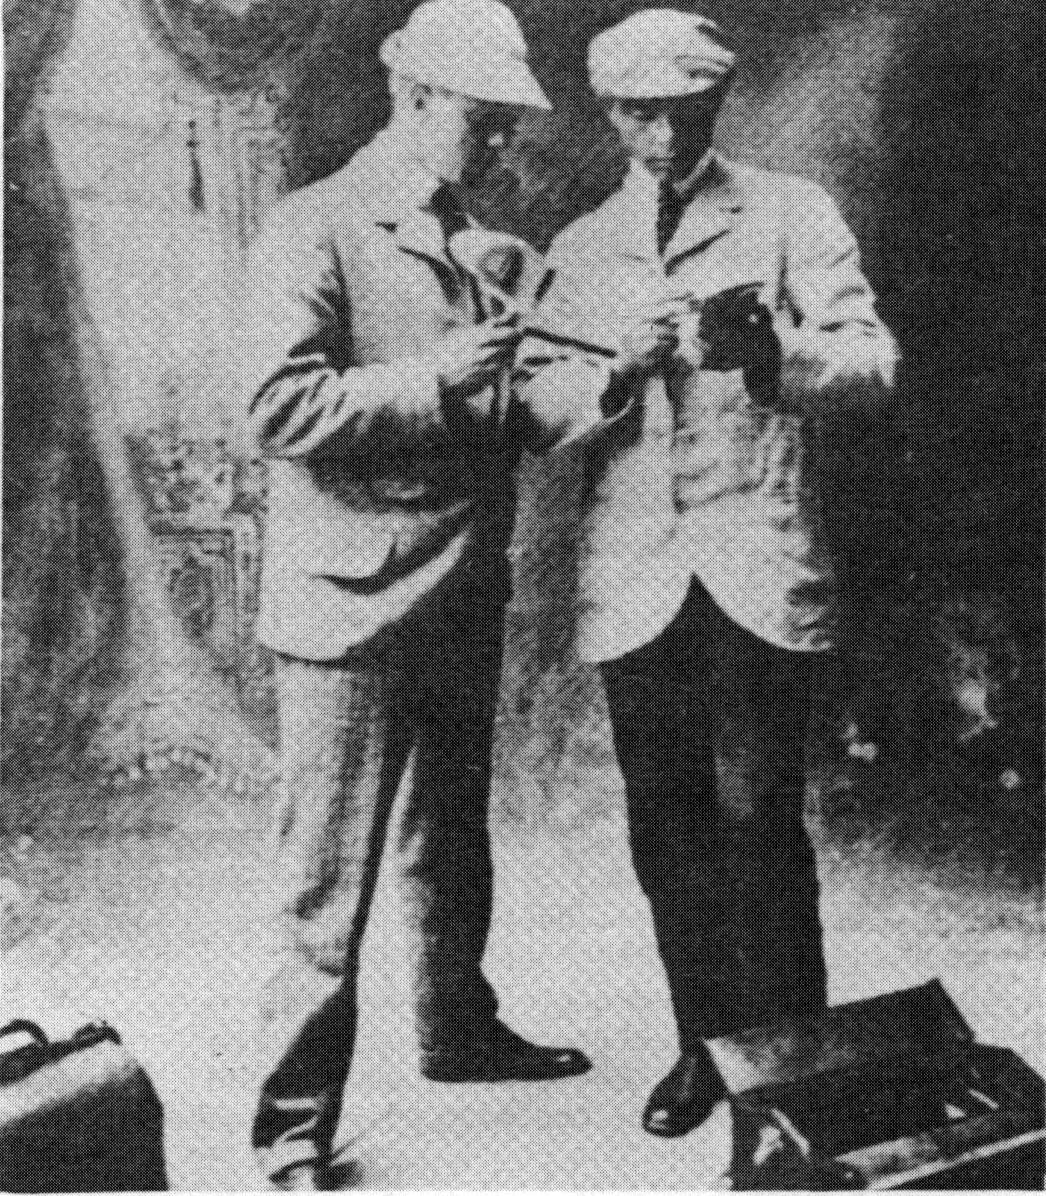 Sandburg and his sales partner, Frederick Dickinson (at left) pose with one of their stereoscope and cards.